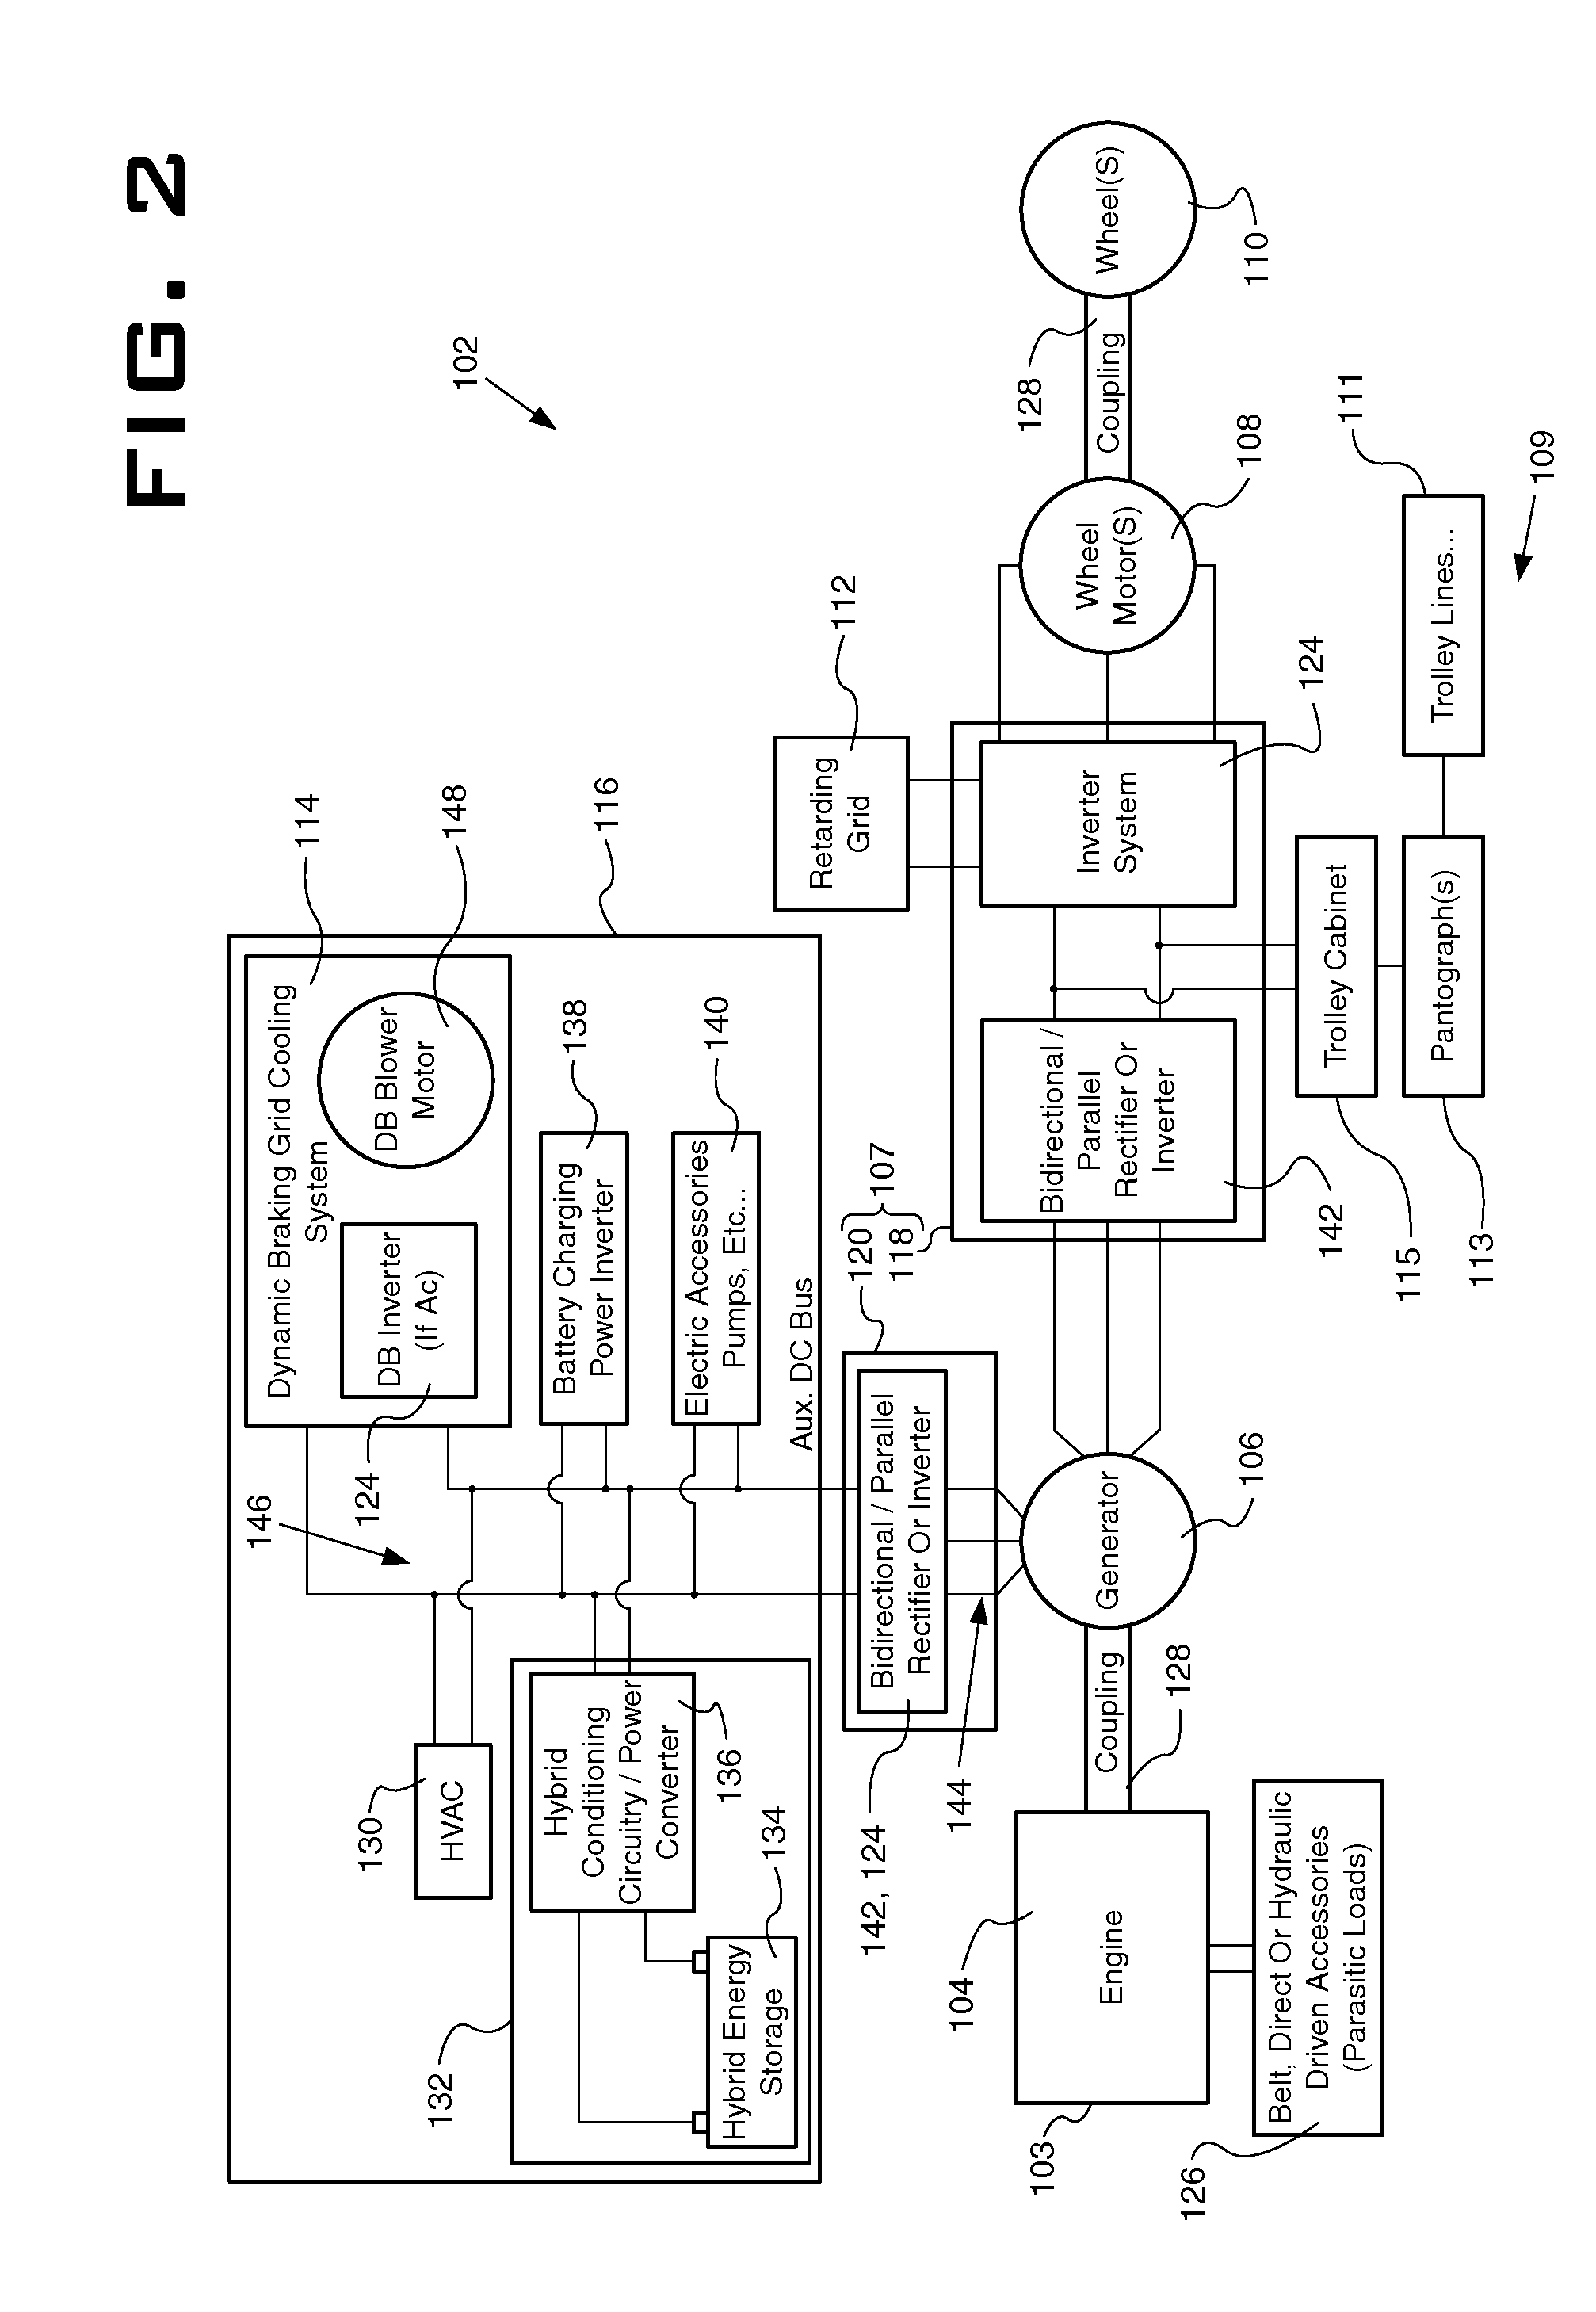 Method and apparatus to eliminate fuel use for electric drive machines during trolley operation